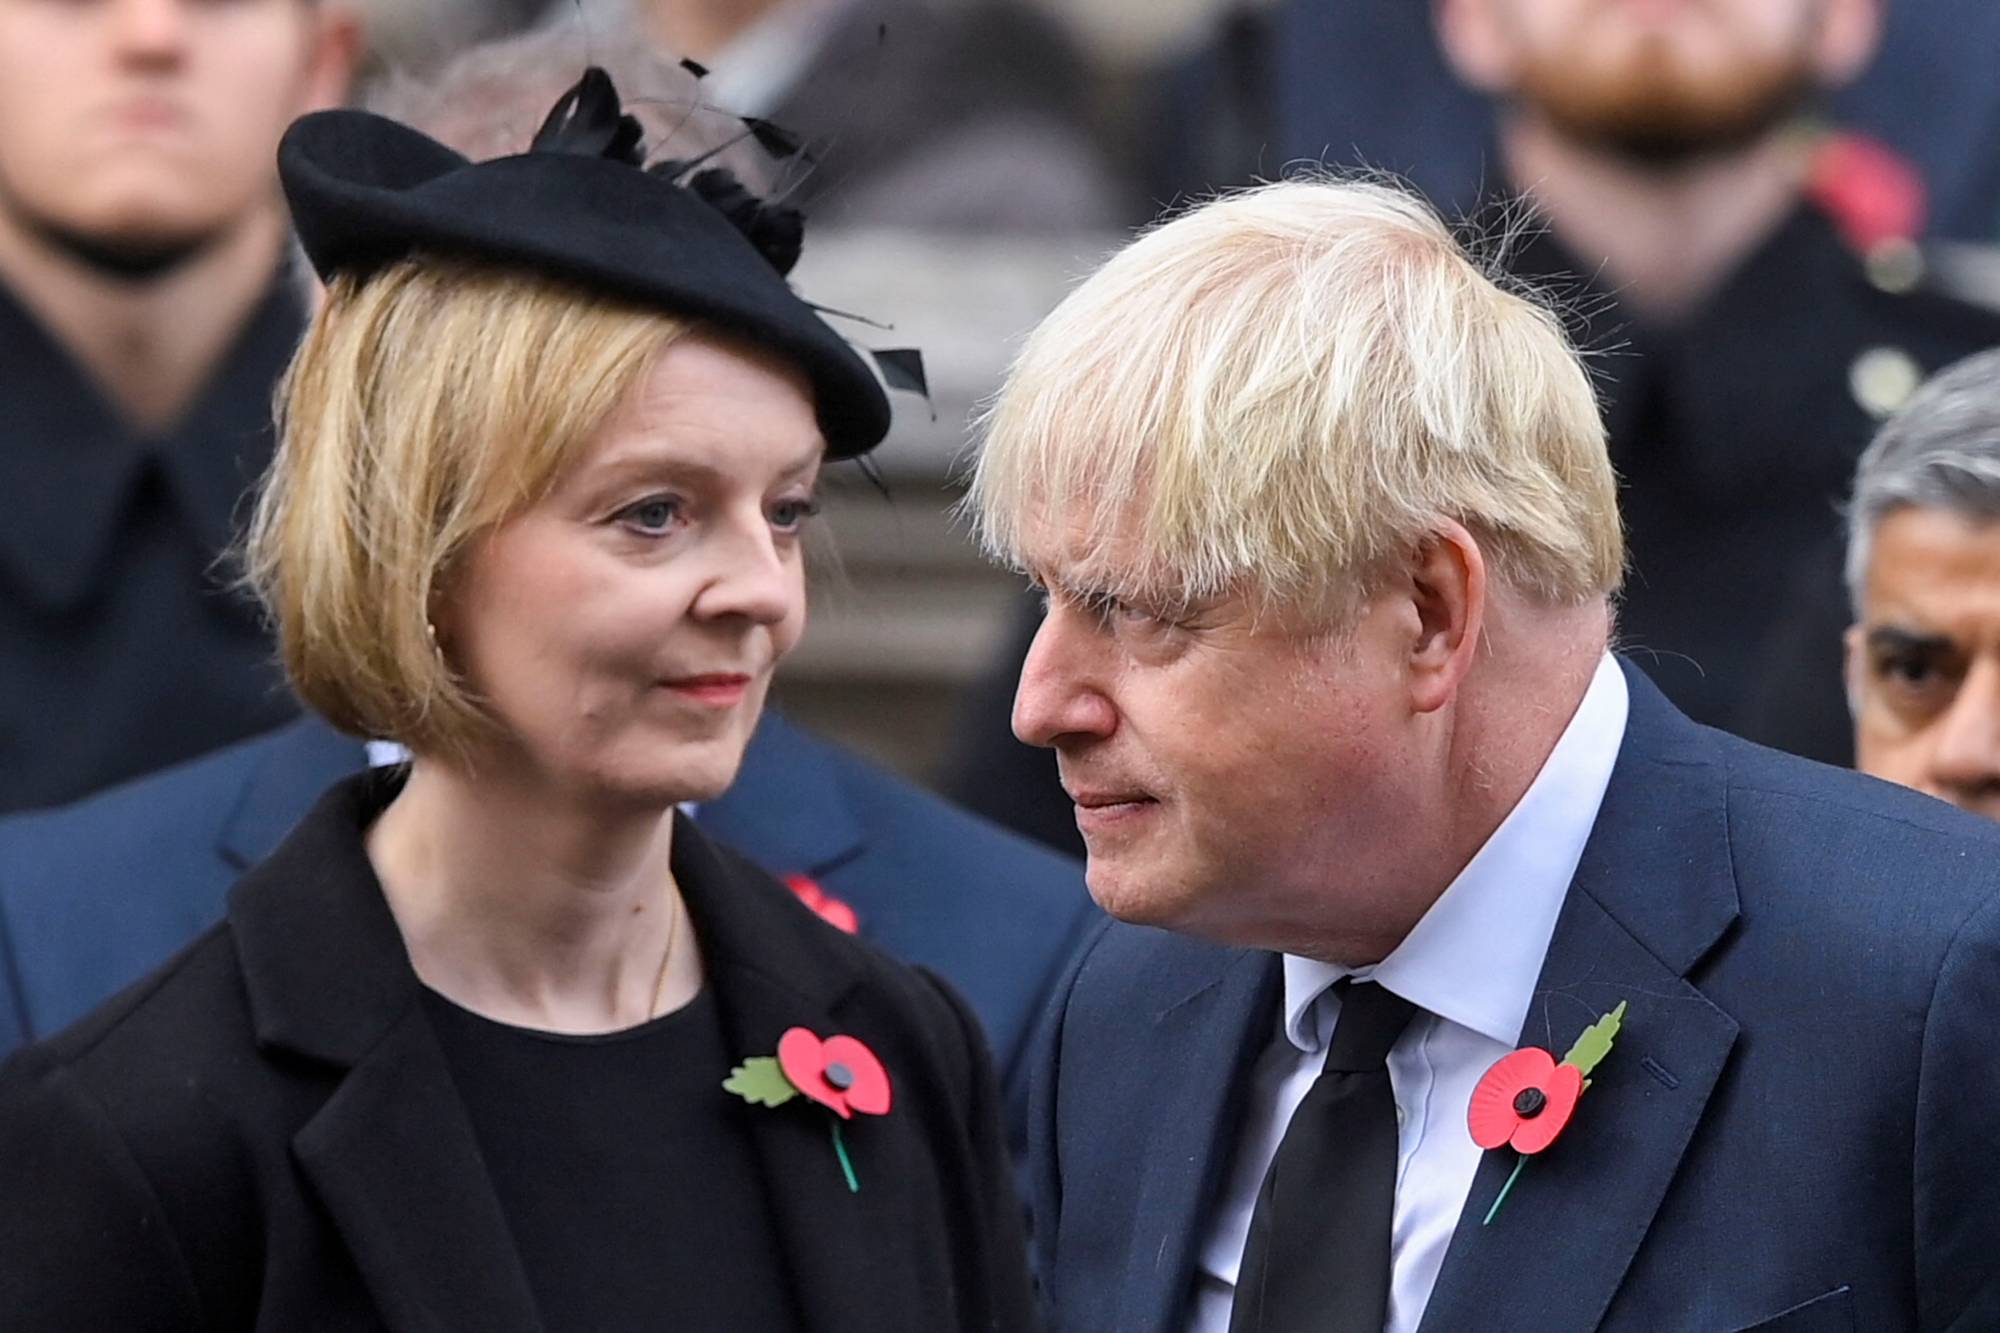 Former British prime ministers Liz Truss and Boris Johnson in London on Nov. 13. The two form a central part of the populism that has gripped the U.K. in recent years. | POOL / VIA REUTERS